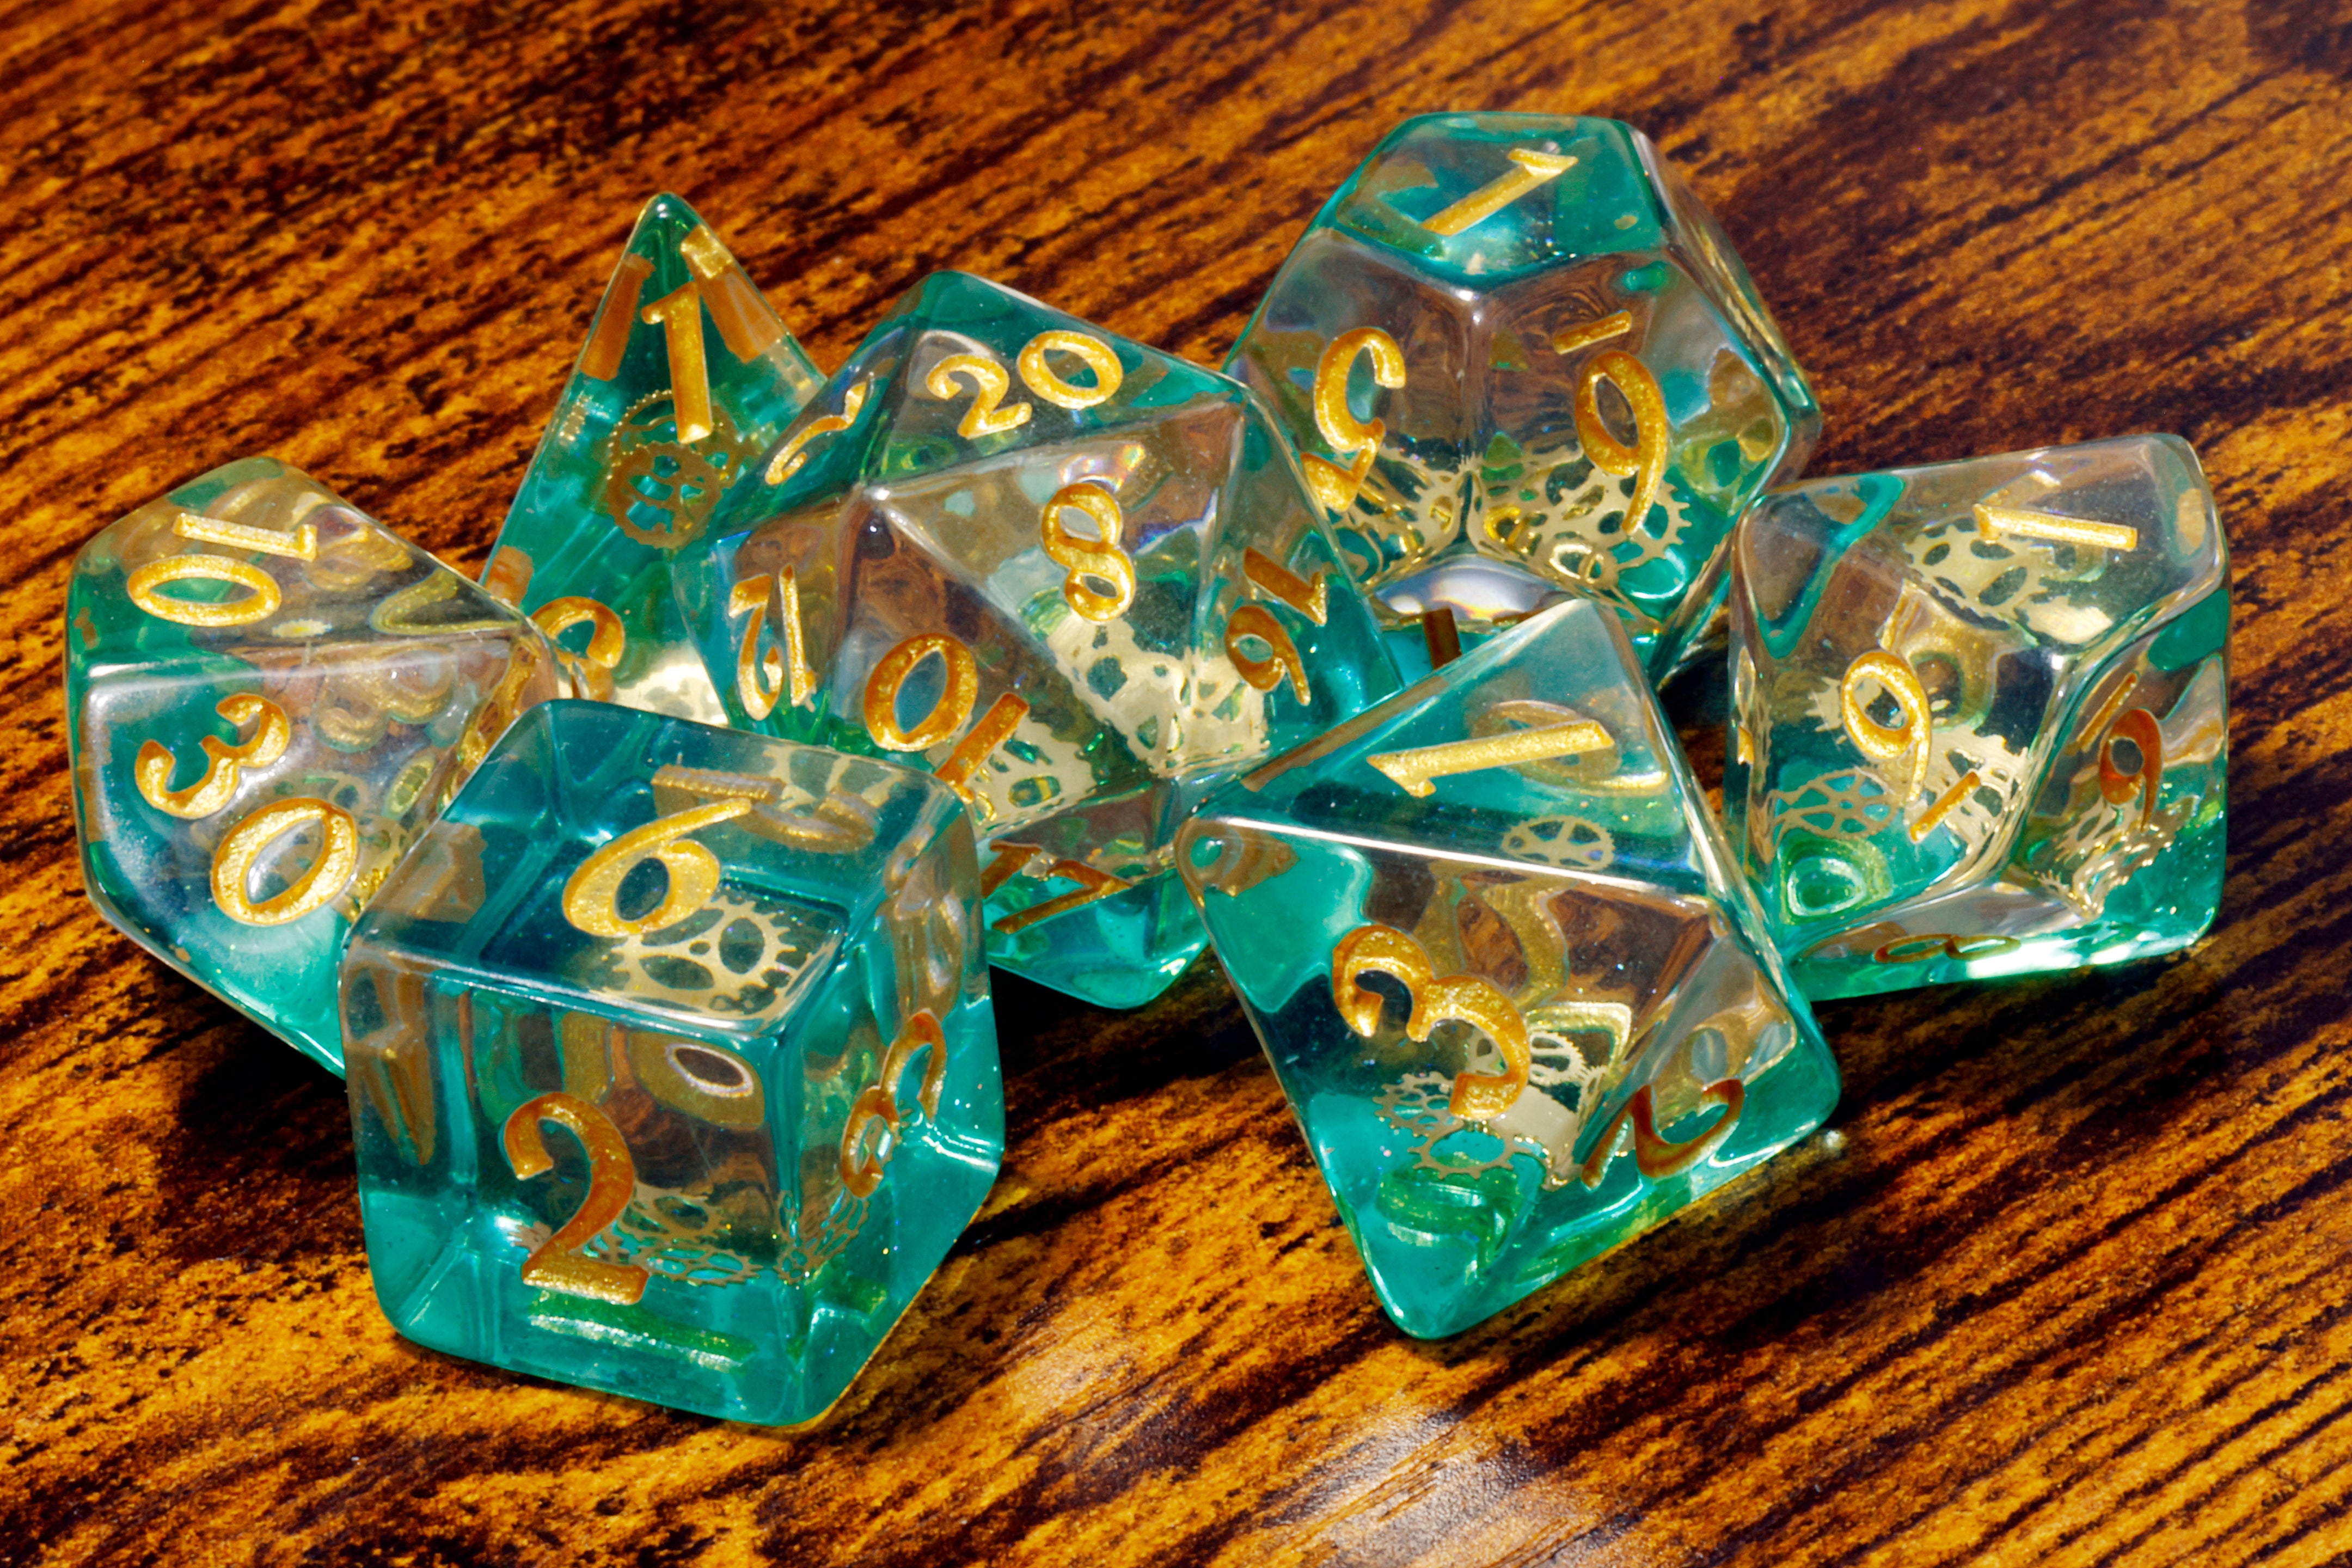 a group of dice sitting on top of a wooden table